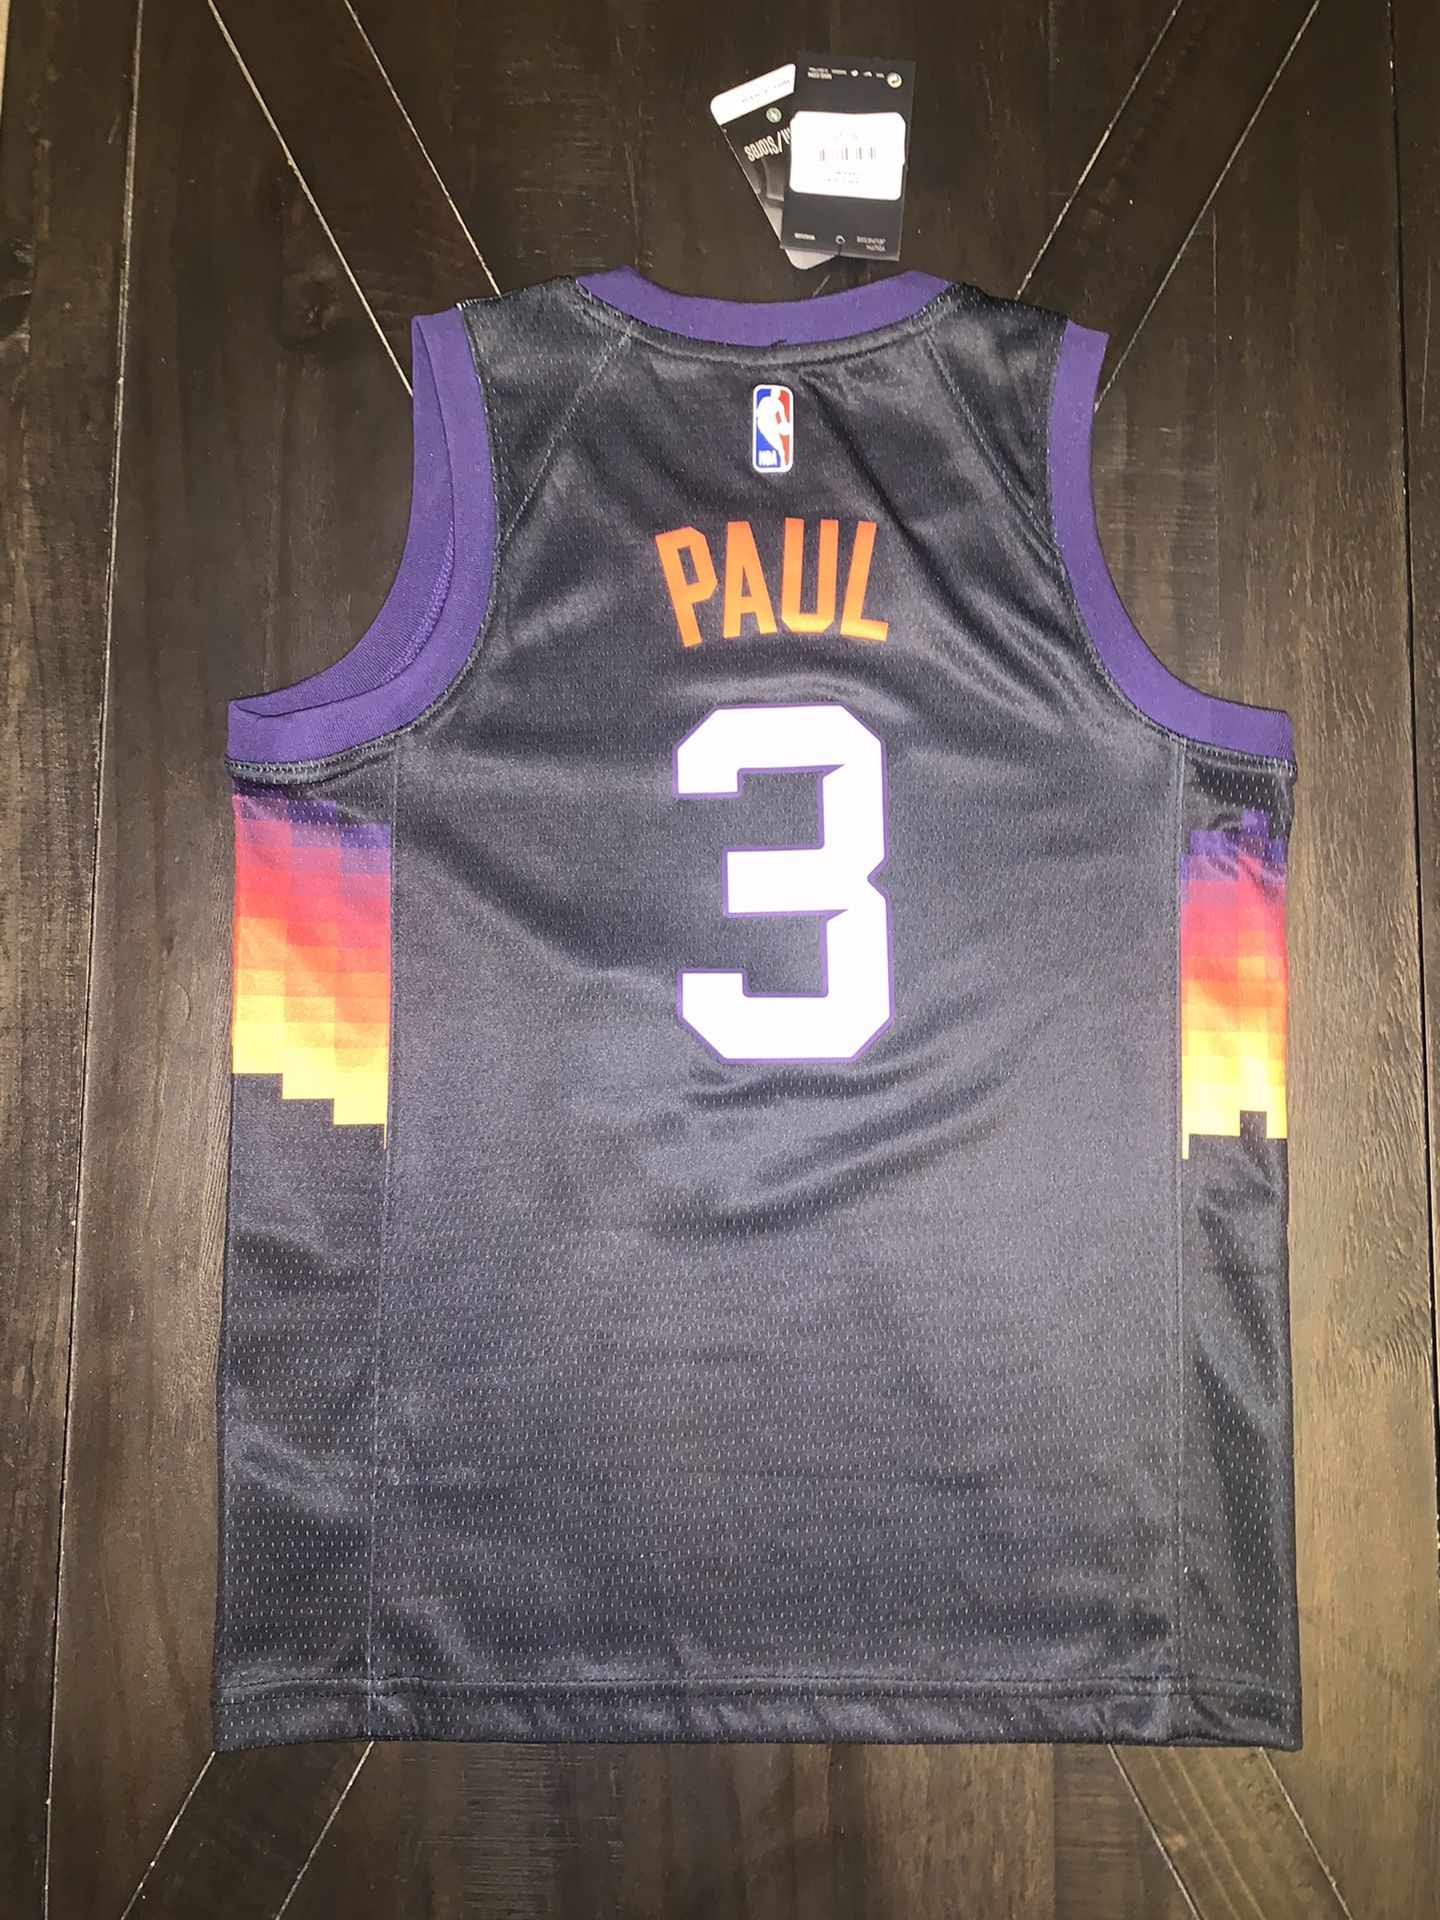 Valley Jersey purchase! : r/suns